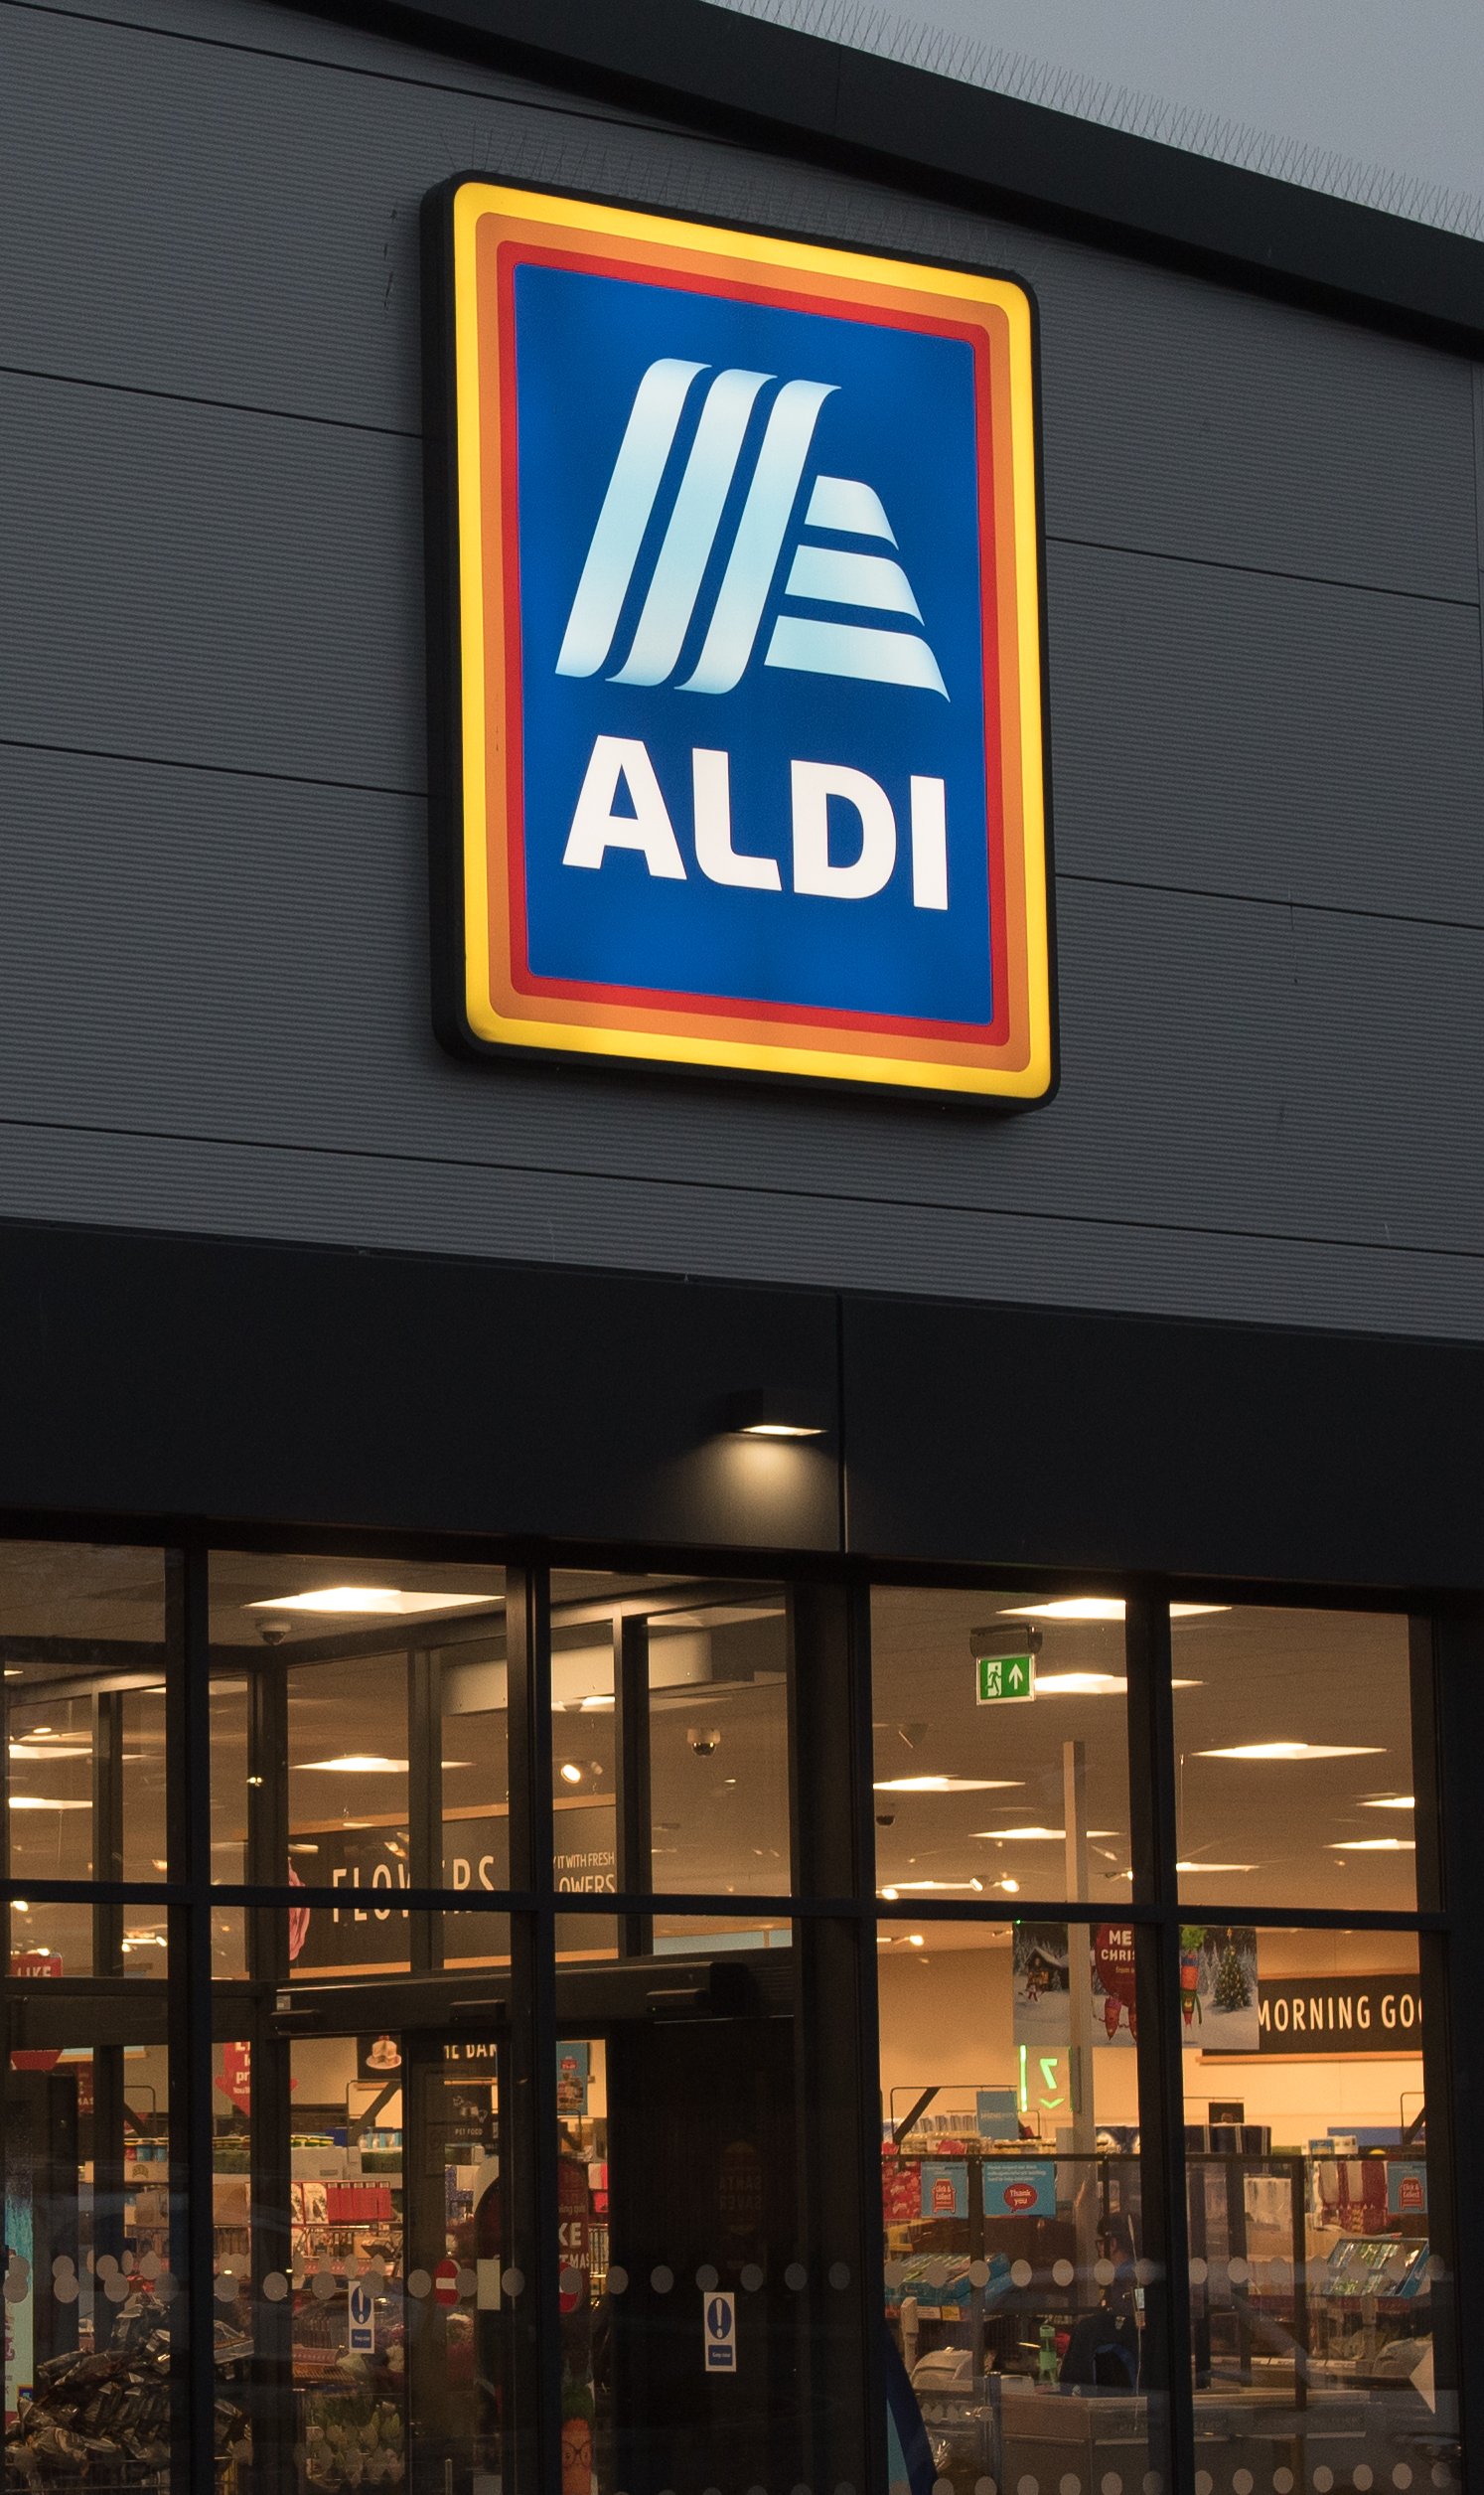 A view of one of the thousands of Aldi Supermarkets present in many countries around the world. | Photo: Getty Images.